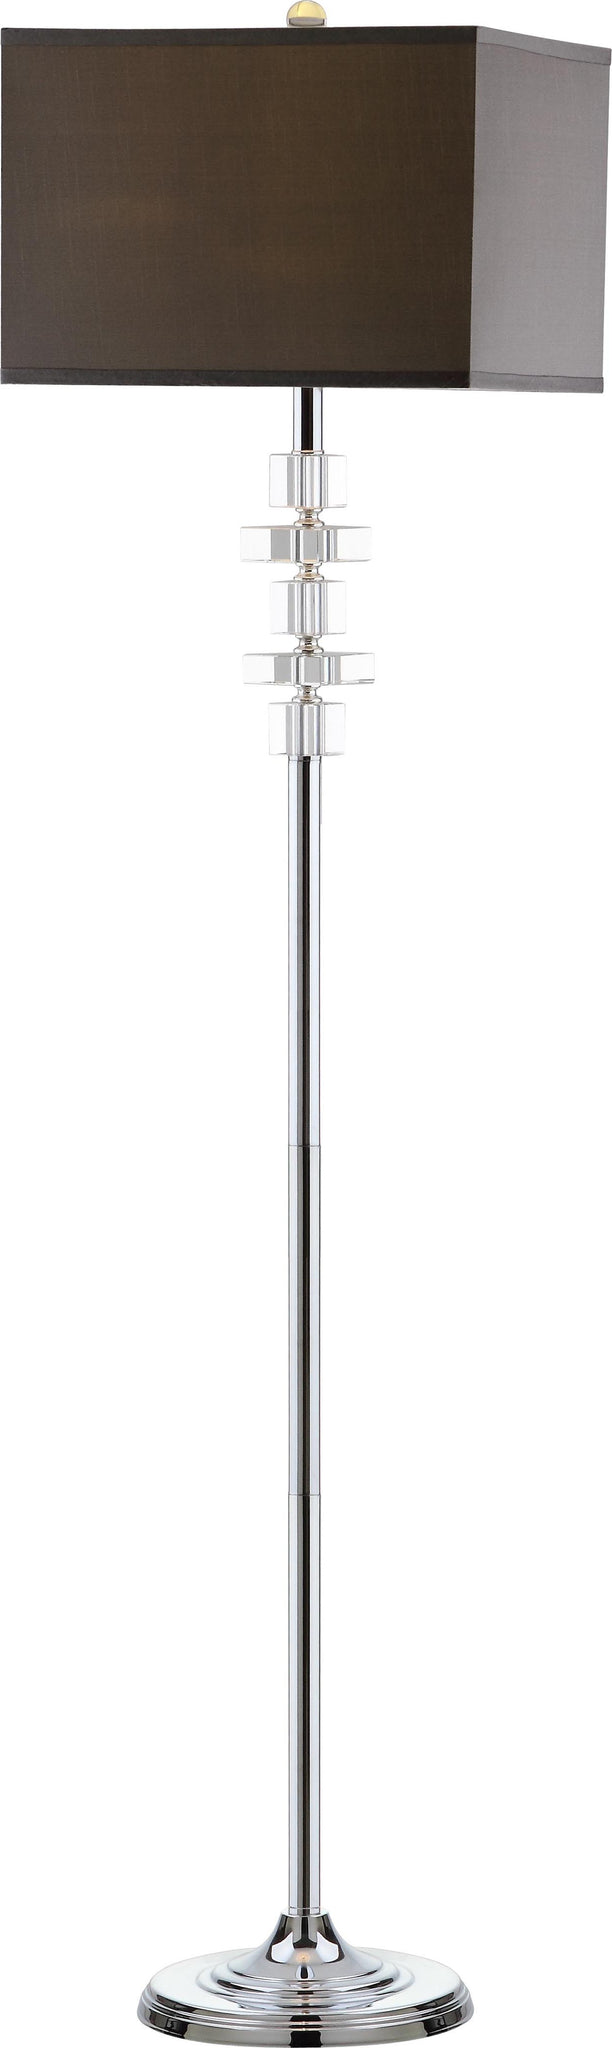 Safavieh Times 605-Inch H Square Floor Lamp Clear/Chrome Mirror main image